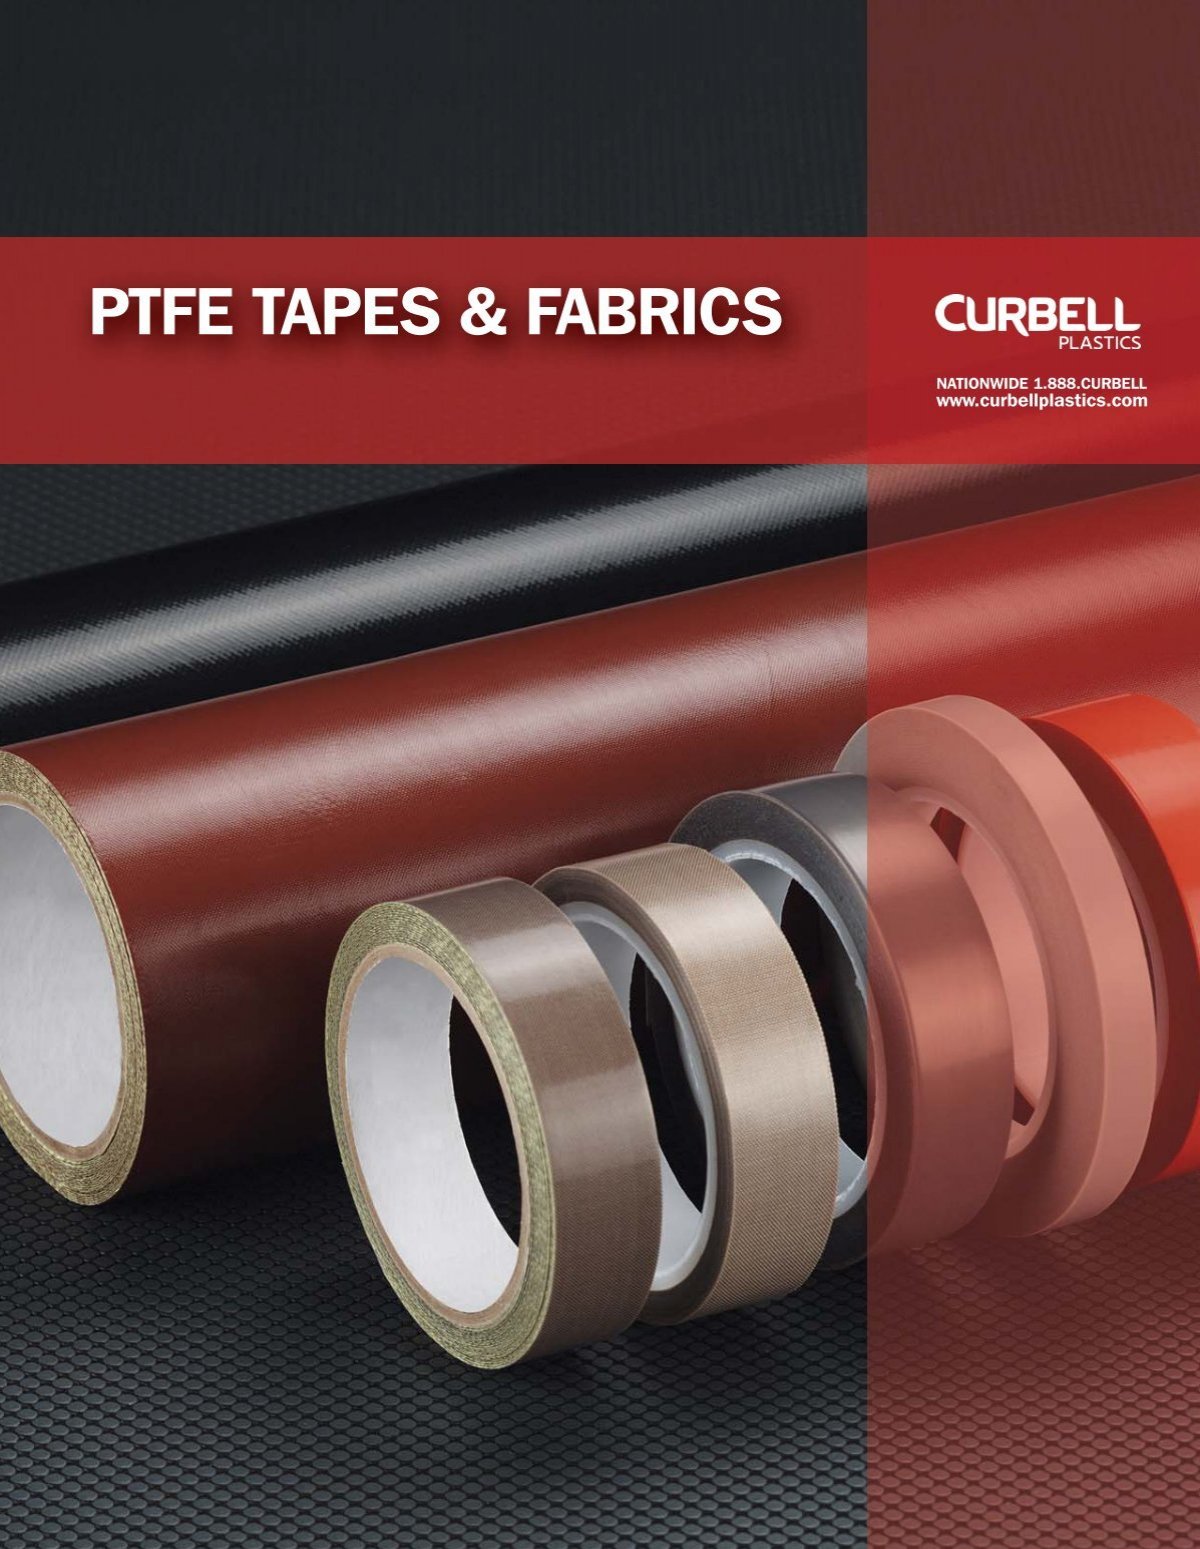 ptfe-tapes-and-ptfe-fabrics-booklet-curbell-plastics